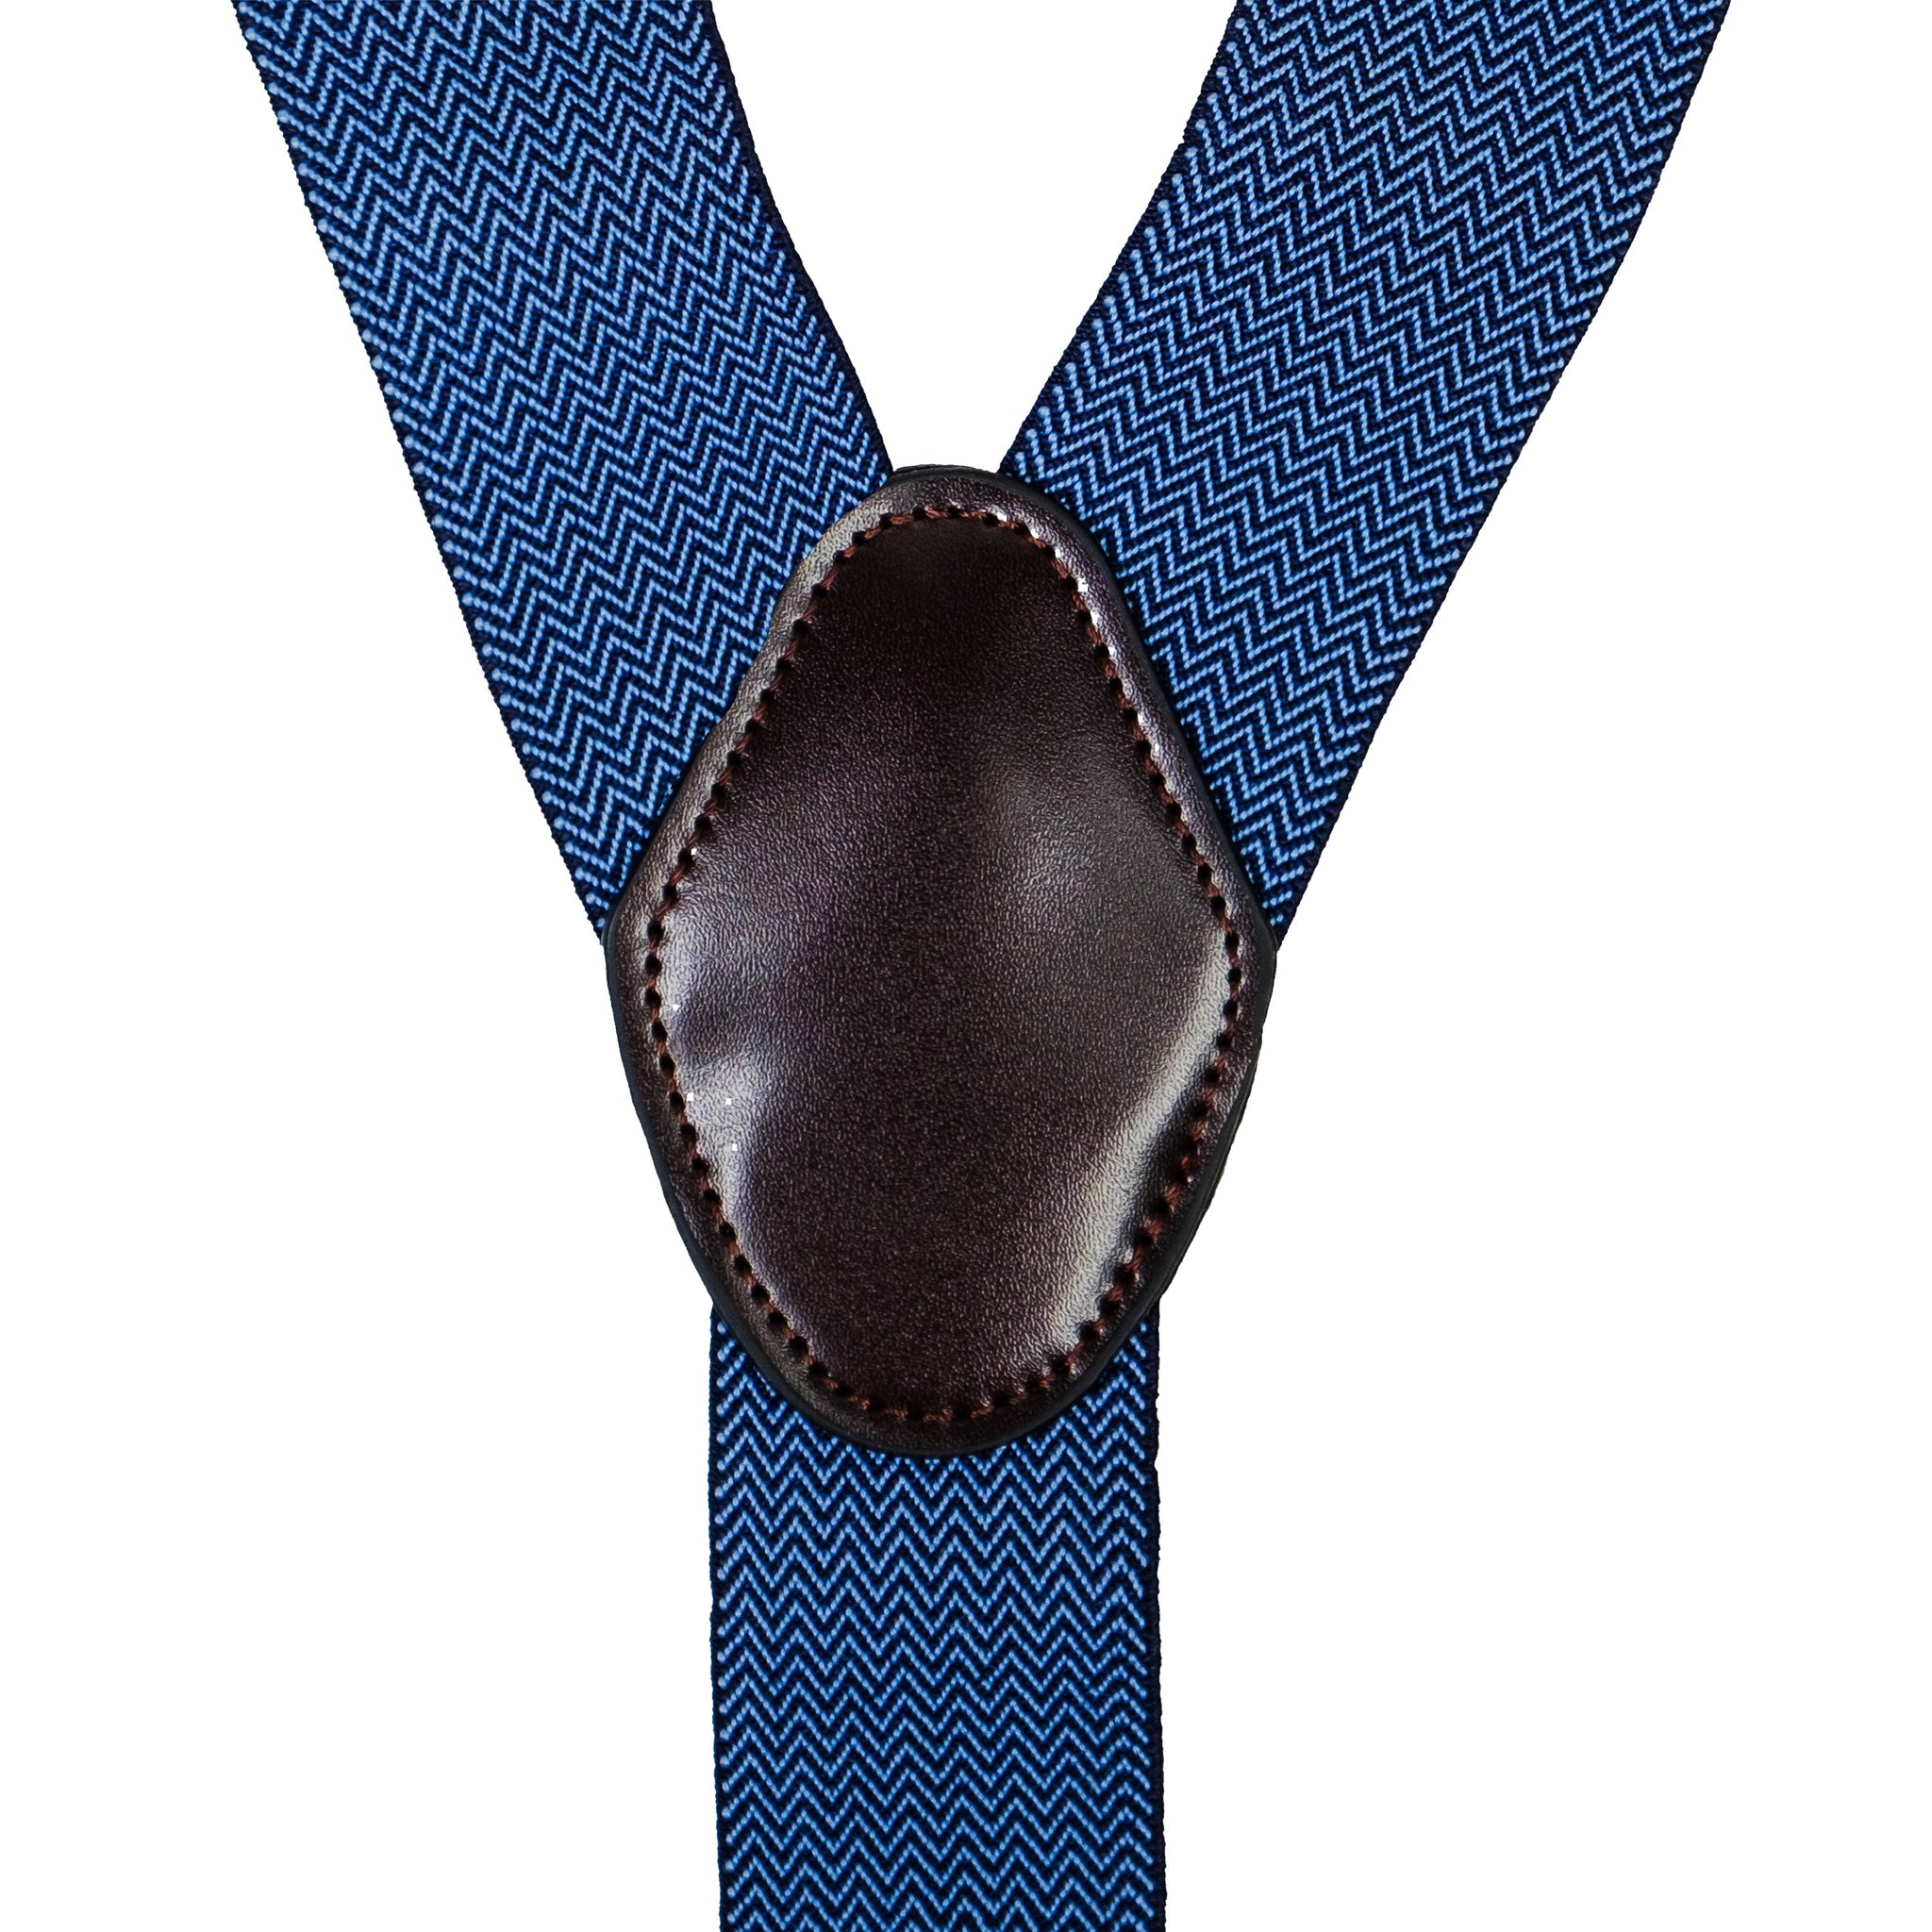 Chokore Stretchy Y-shaped Suspenders with 6-clips (Light Blue)